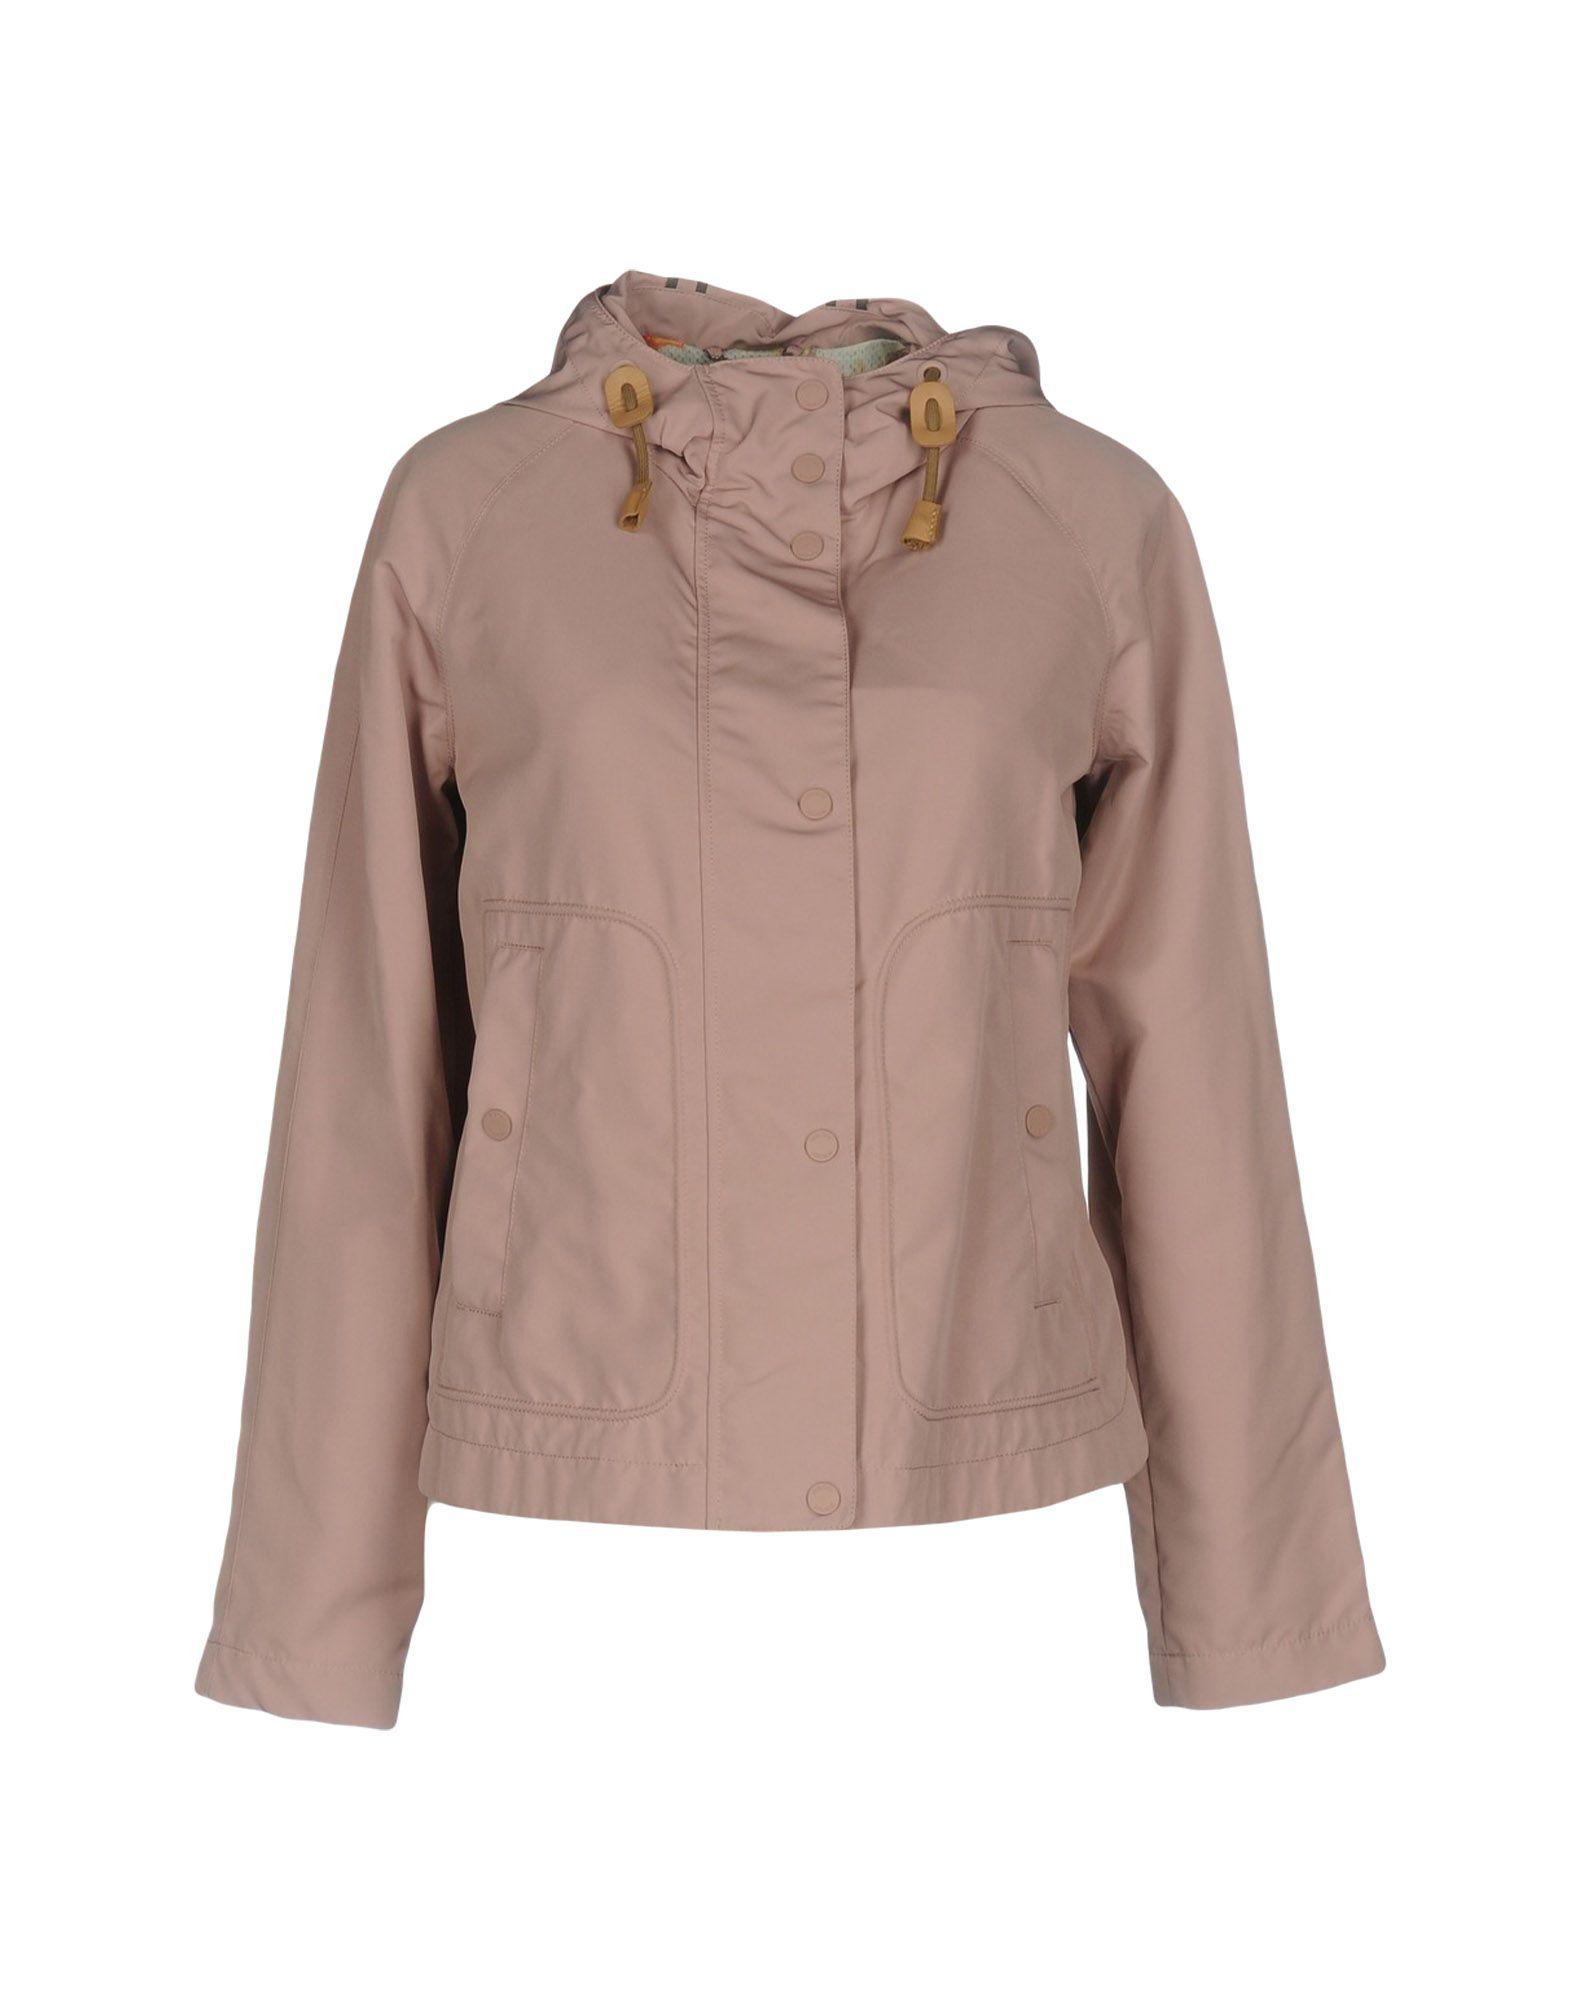 Lyst - Geox Jackets in Brown